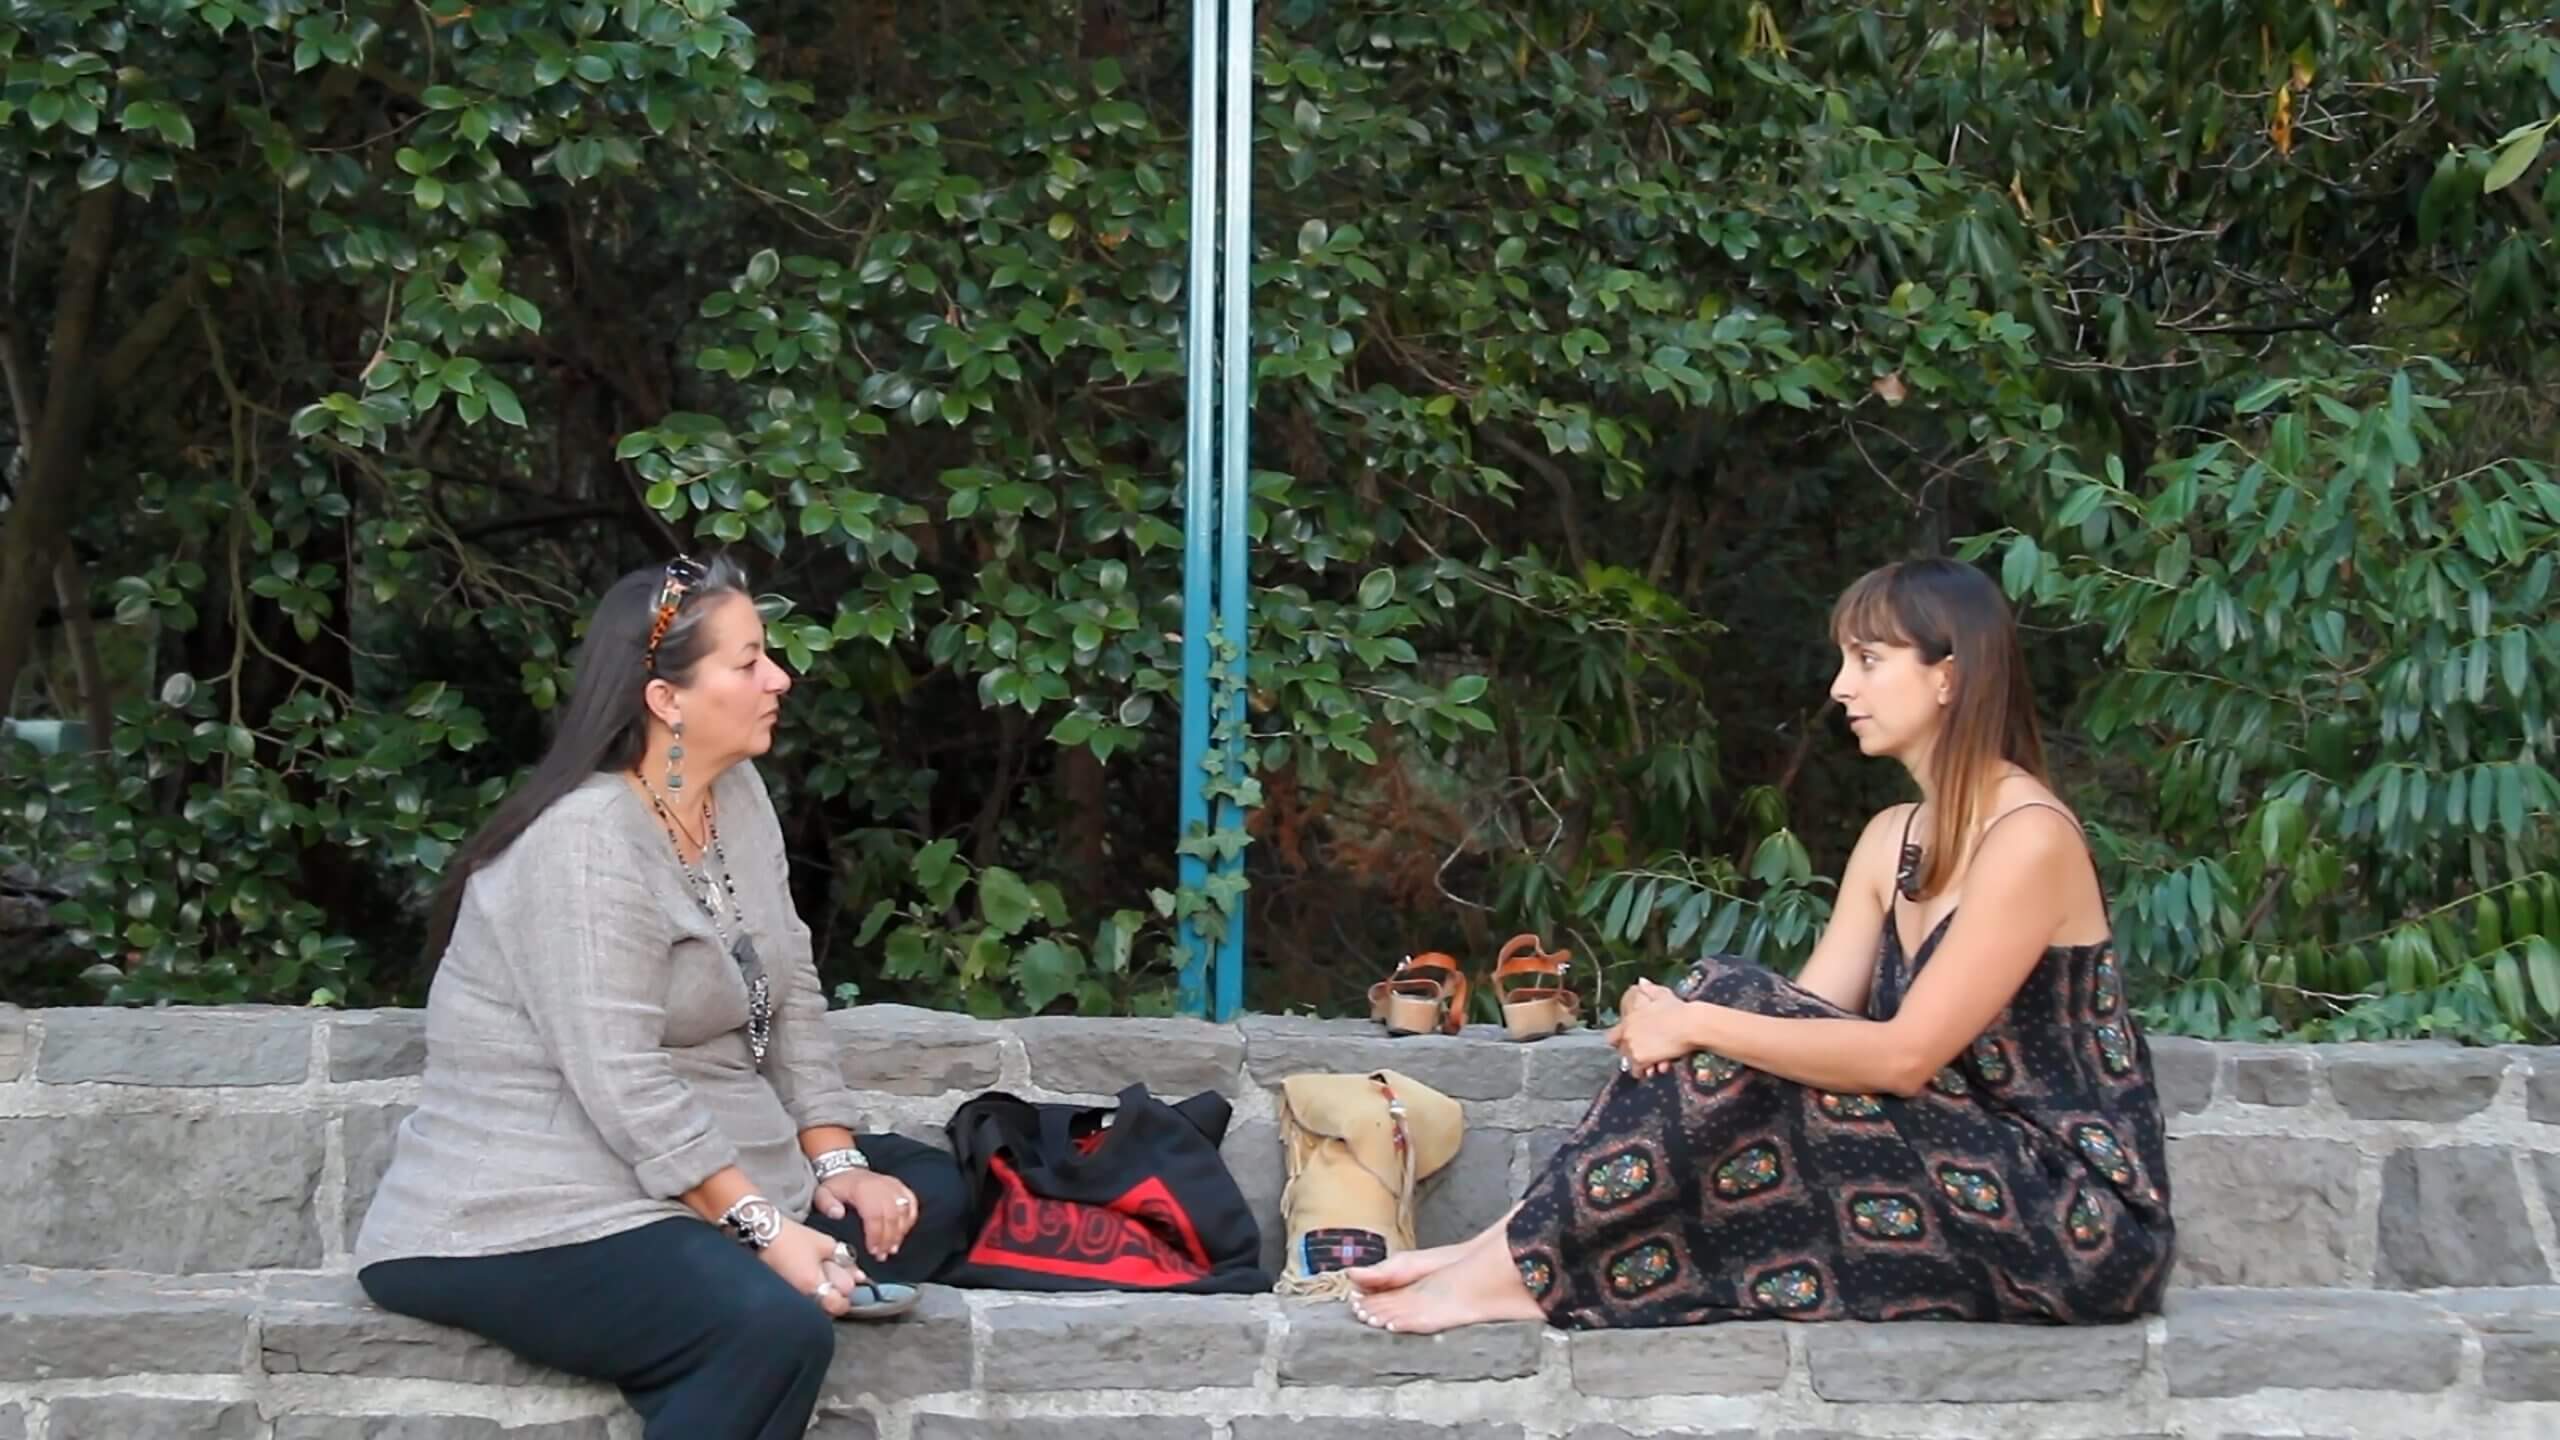 A young and an older woman talking in front of each other.